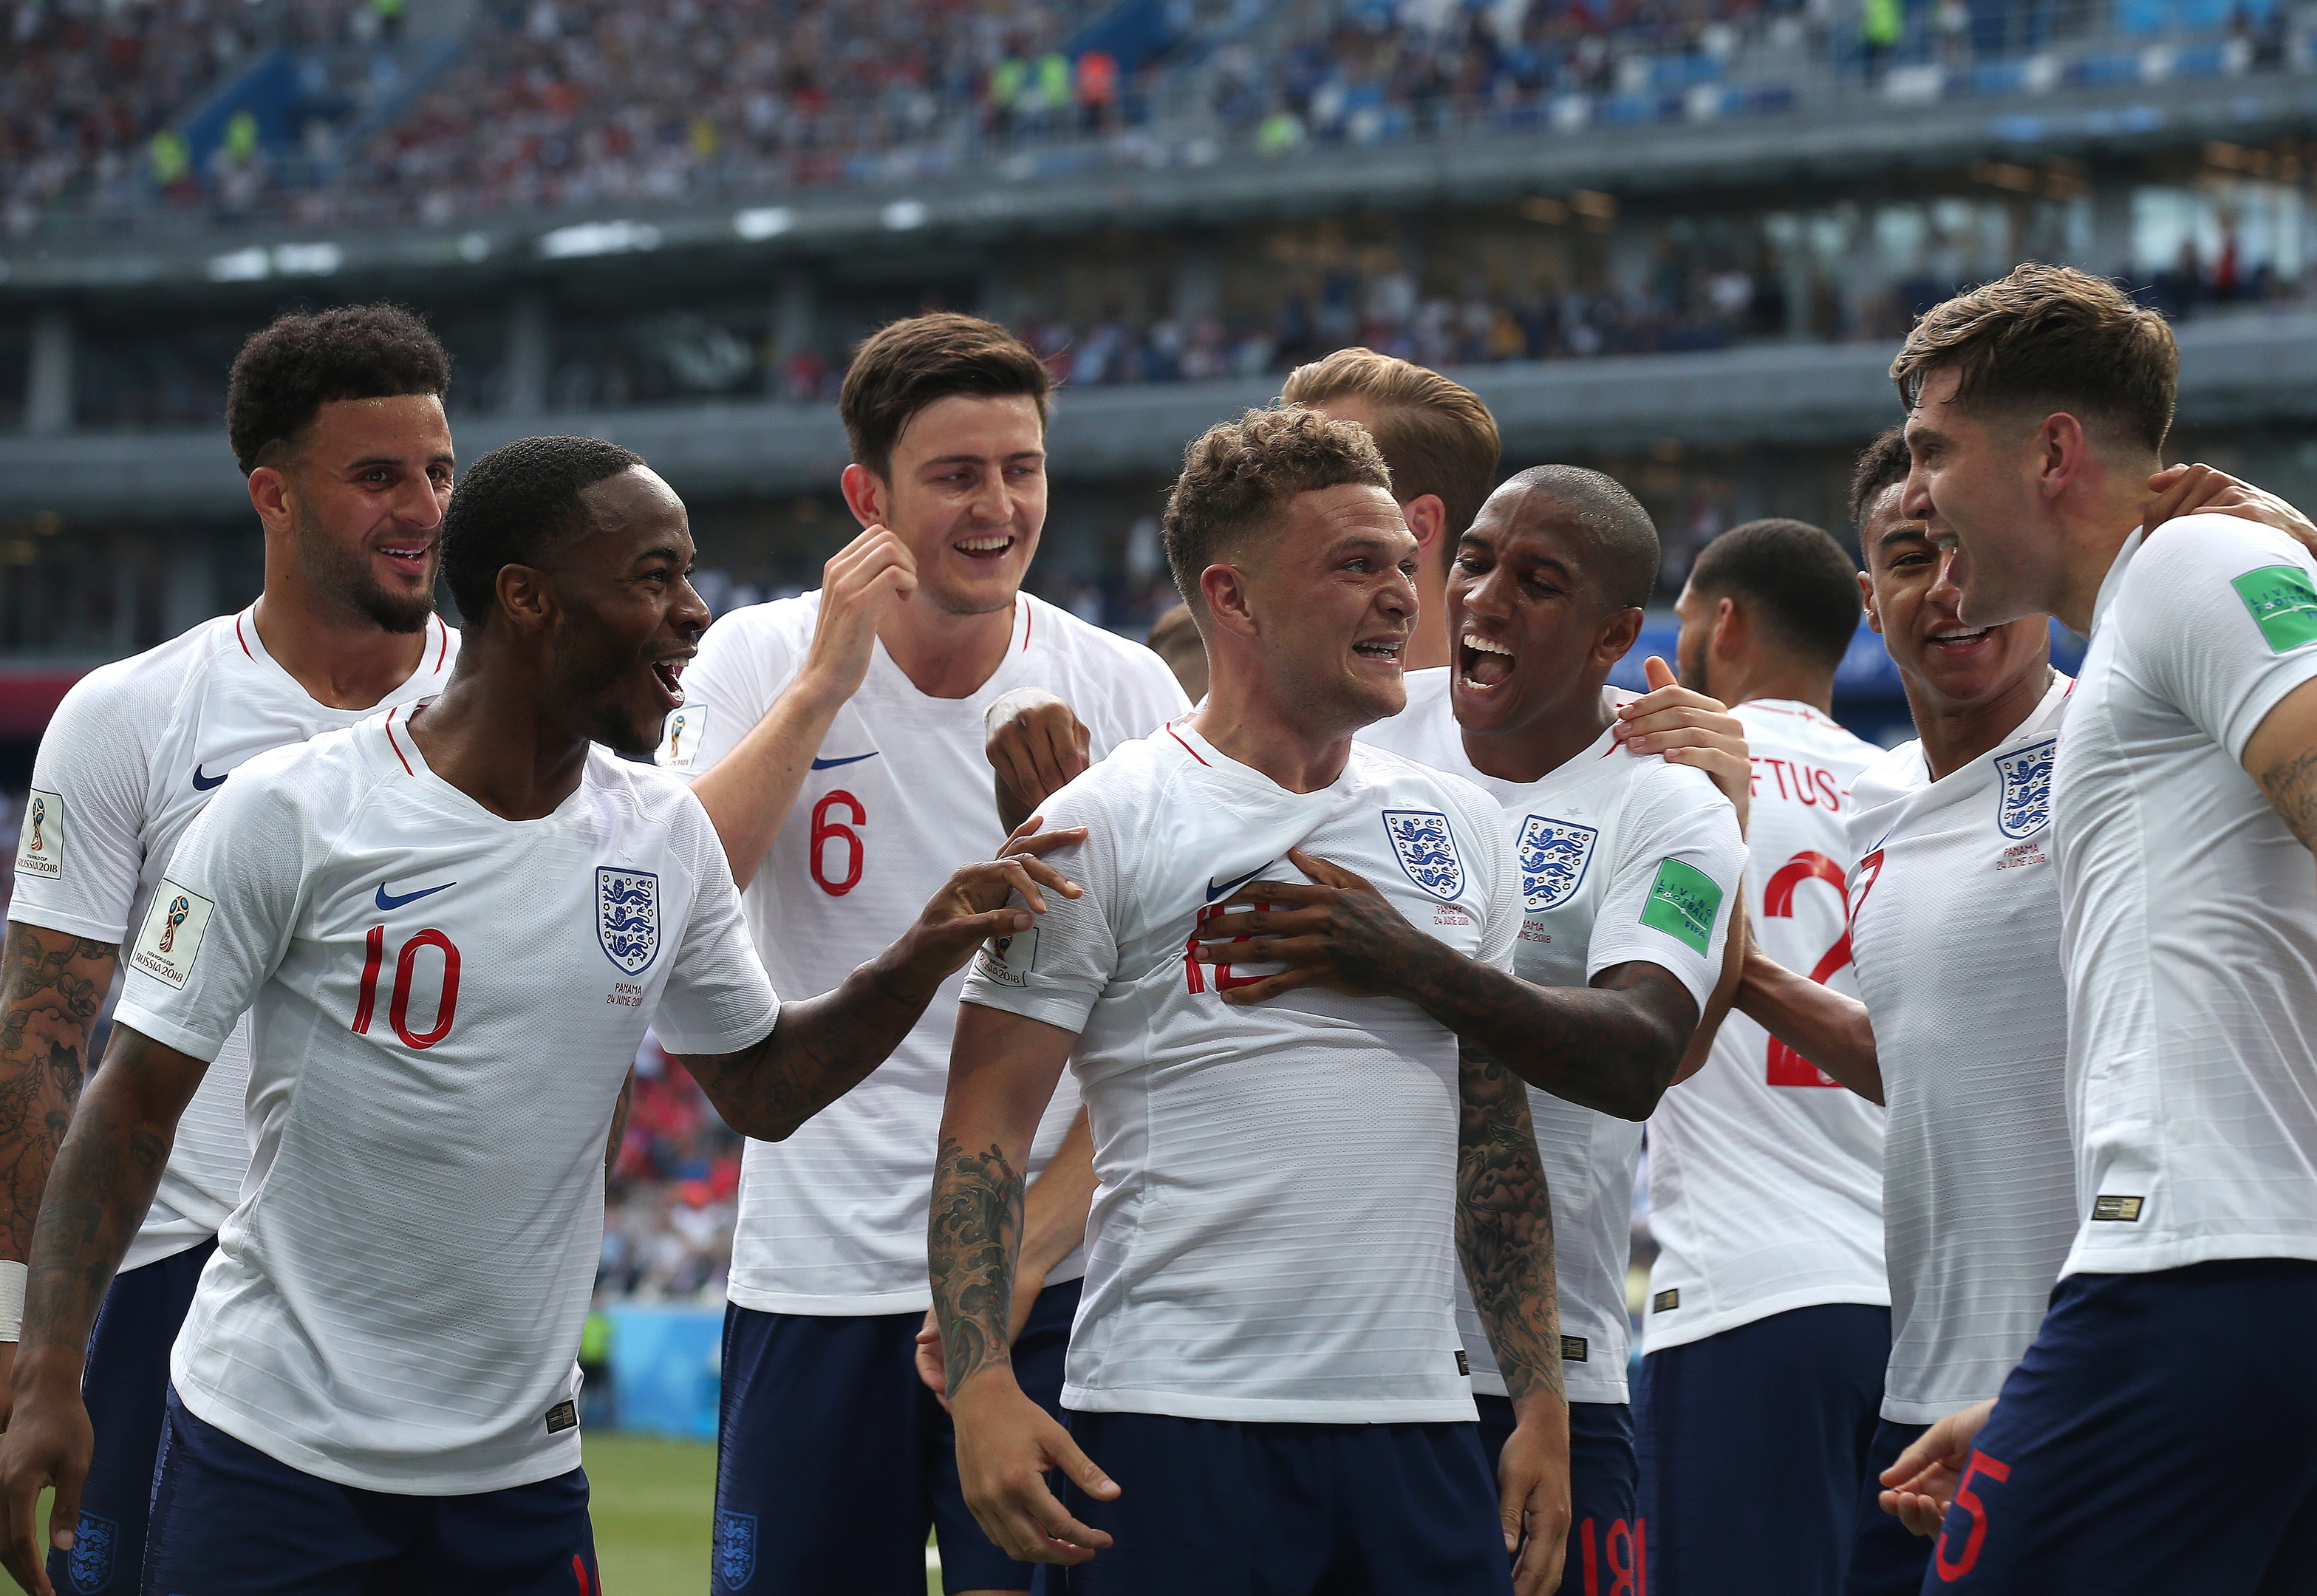 There were a lot of England goals to celebrate on Sunday.